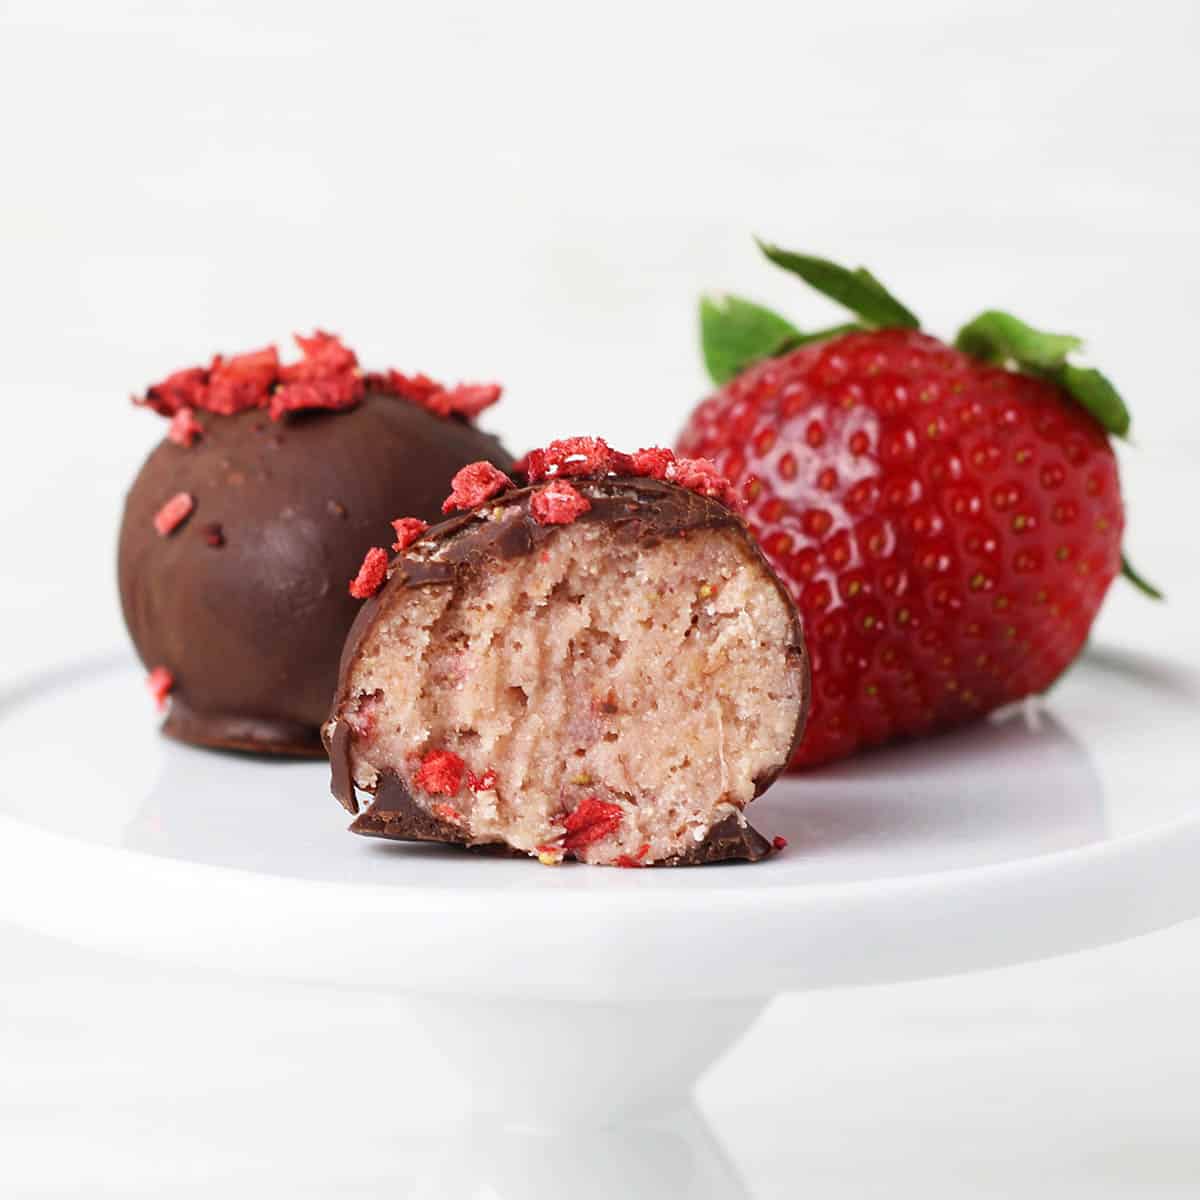 one full and one bitten chocolate covered strawberry protein ball next to a strawberry on a small white plate